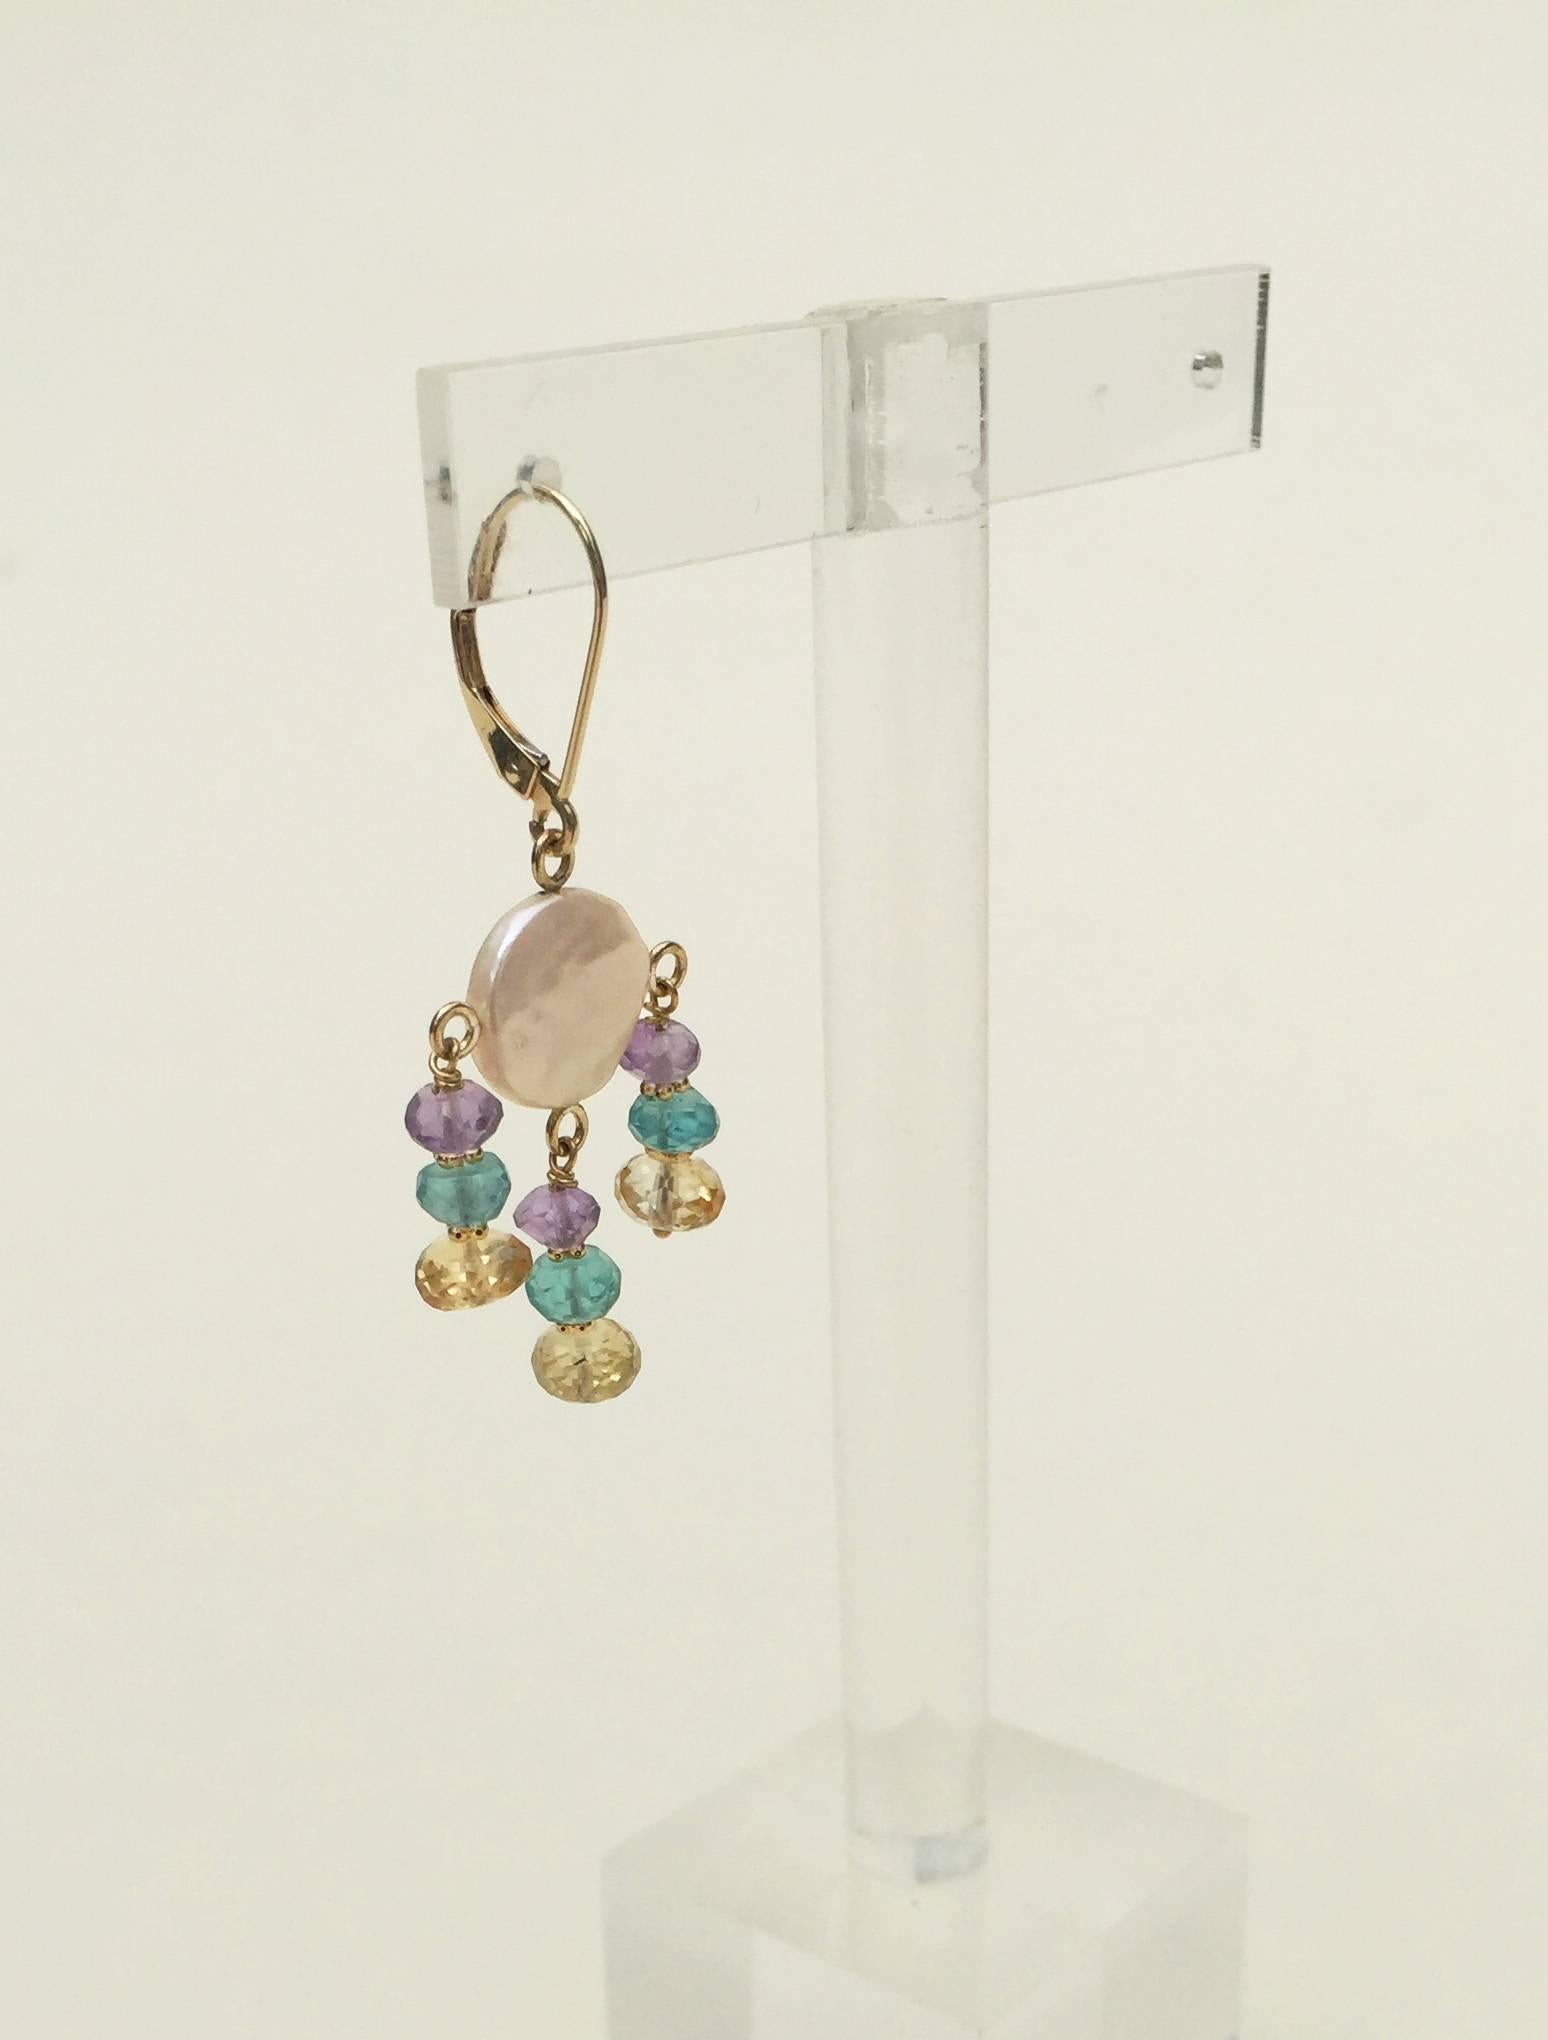 These delicate looking earrings (1.5 inches) are whimsical with a pastel color palette. The pale amethyst, topaz, and citrine highlight the glow of the white coin pearl. The earrings are accented with 14k yellow gold roundels and lever back hooks